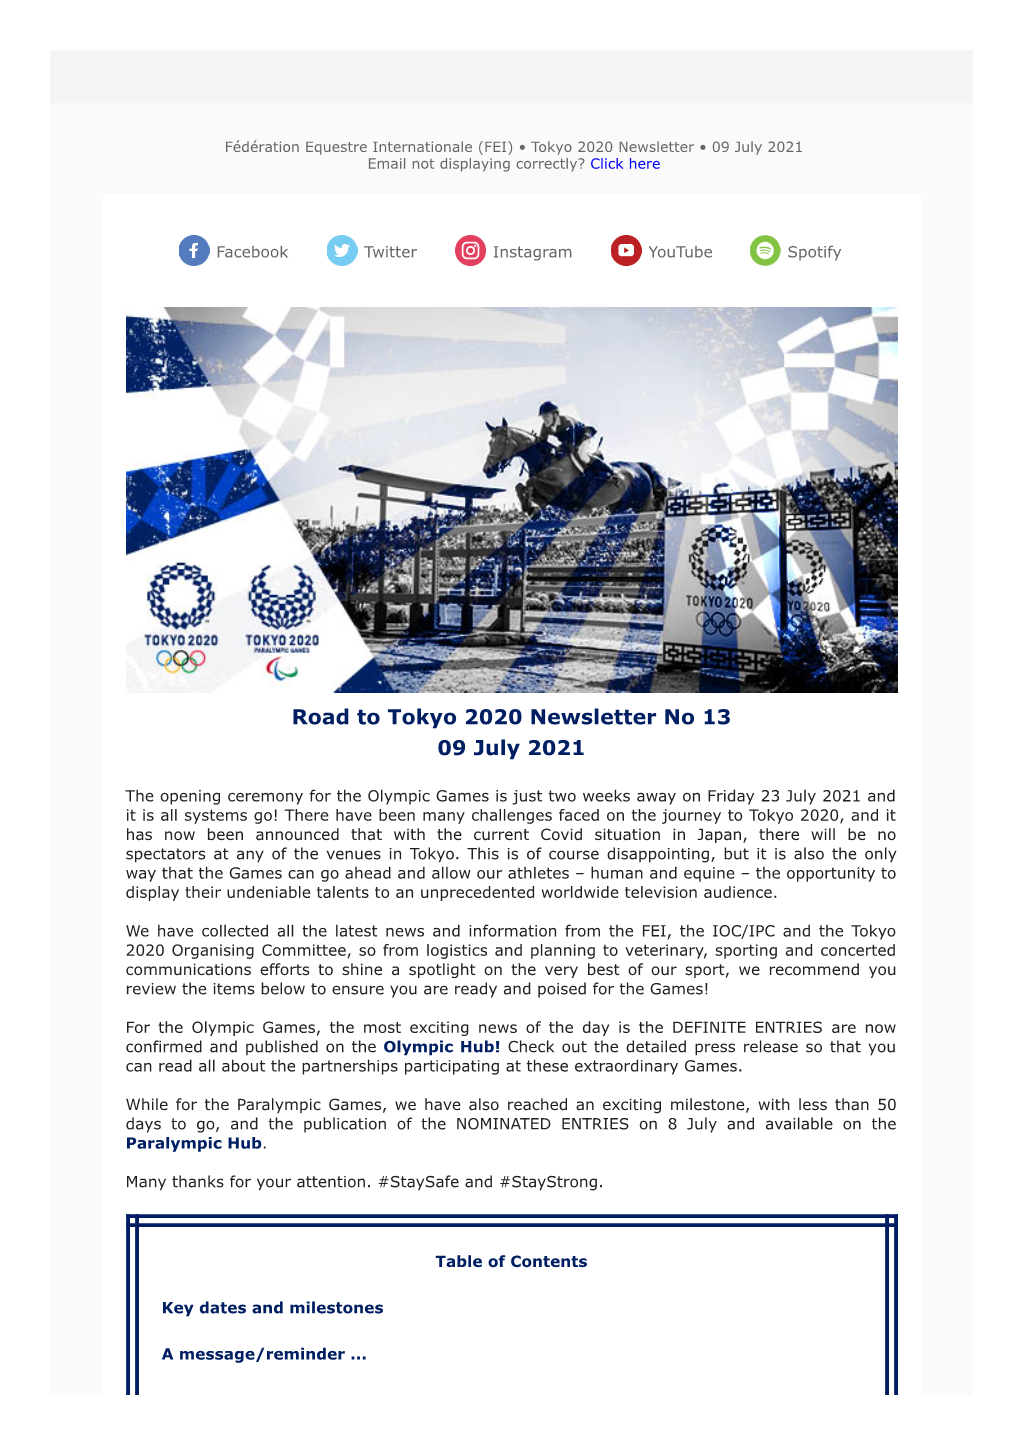 Road to Tokyo 2020 Newsletter No 13 09 July 2021